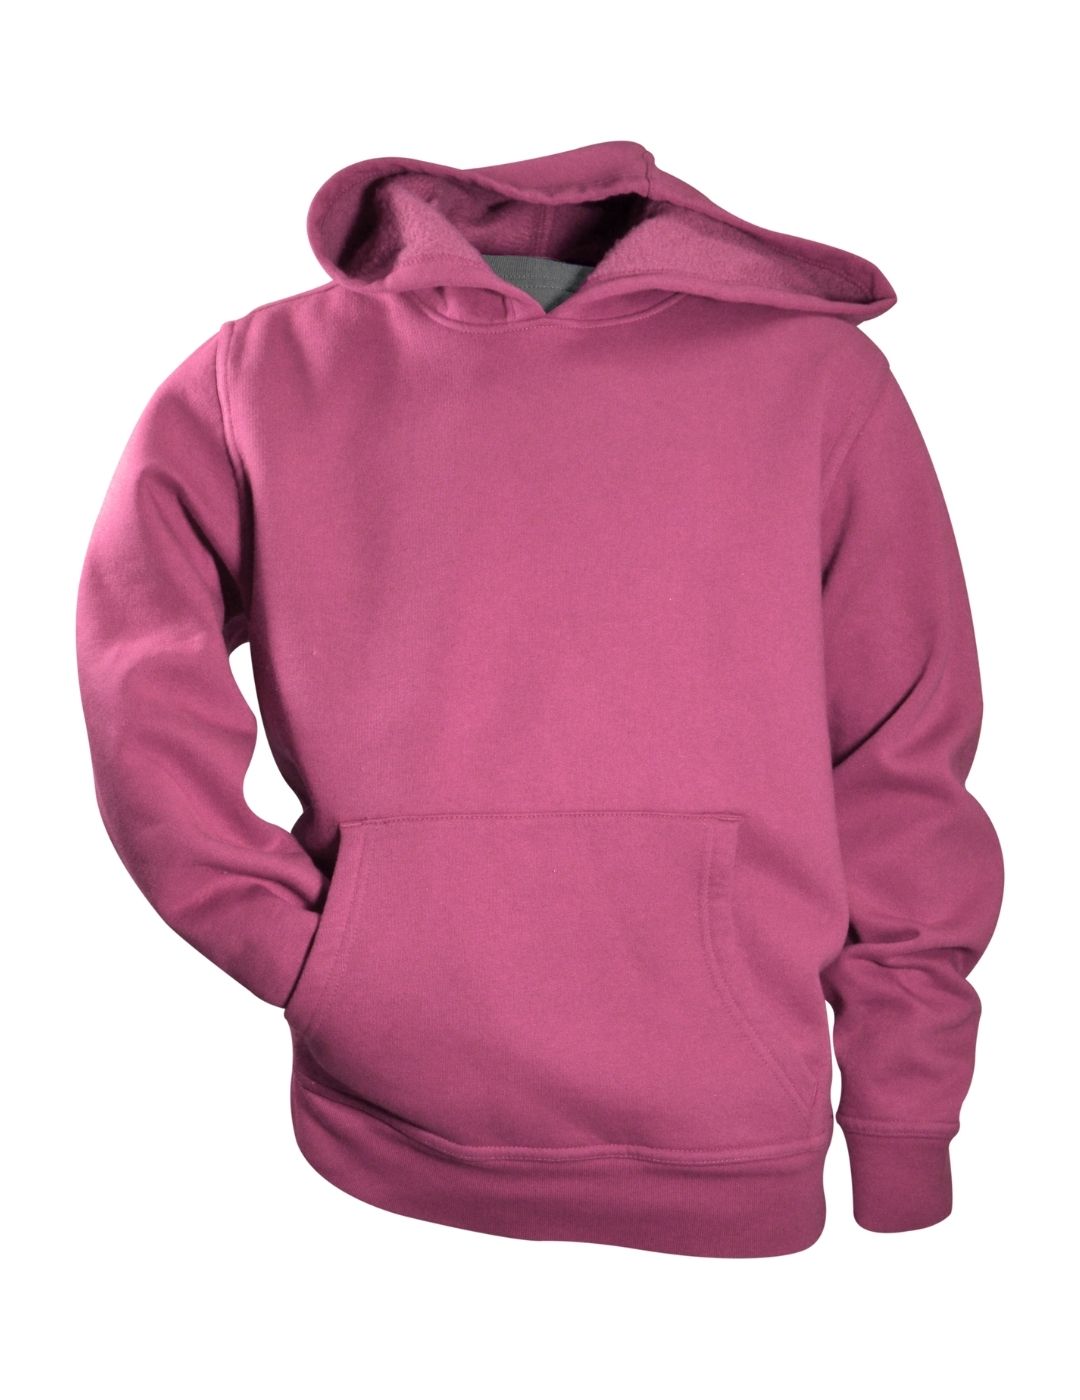 Parker Youth Unisex Hoodie